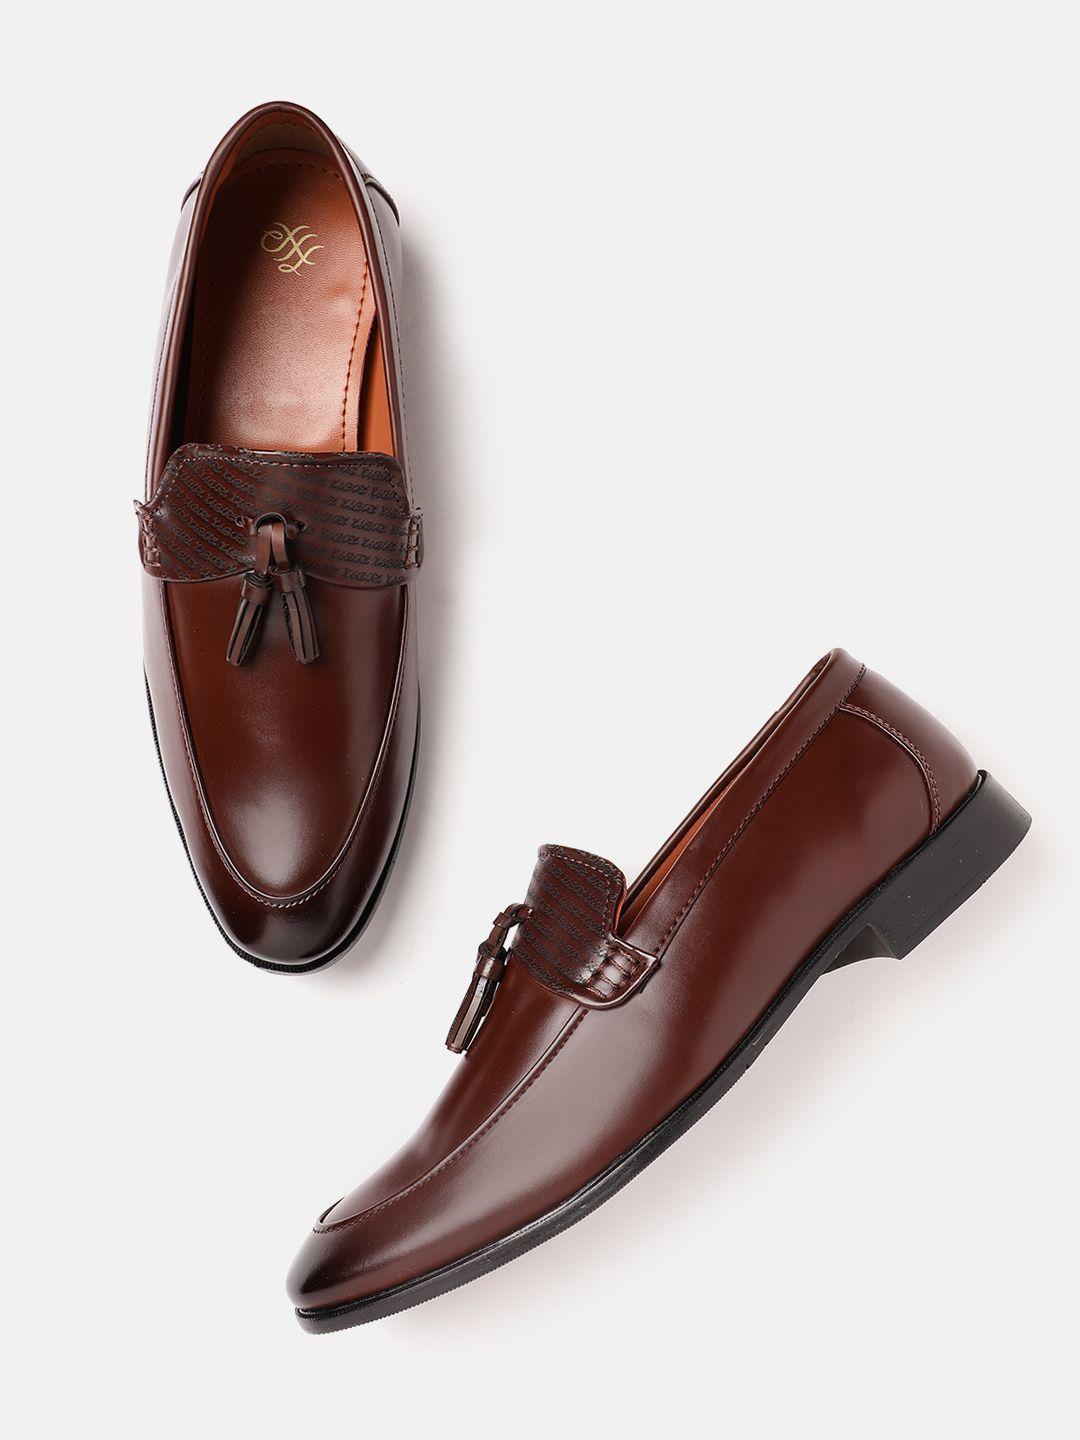 house of pataudi men handcrafted formal loafers with tassel detail